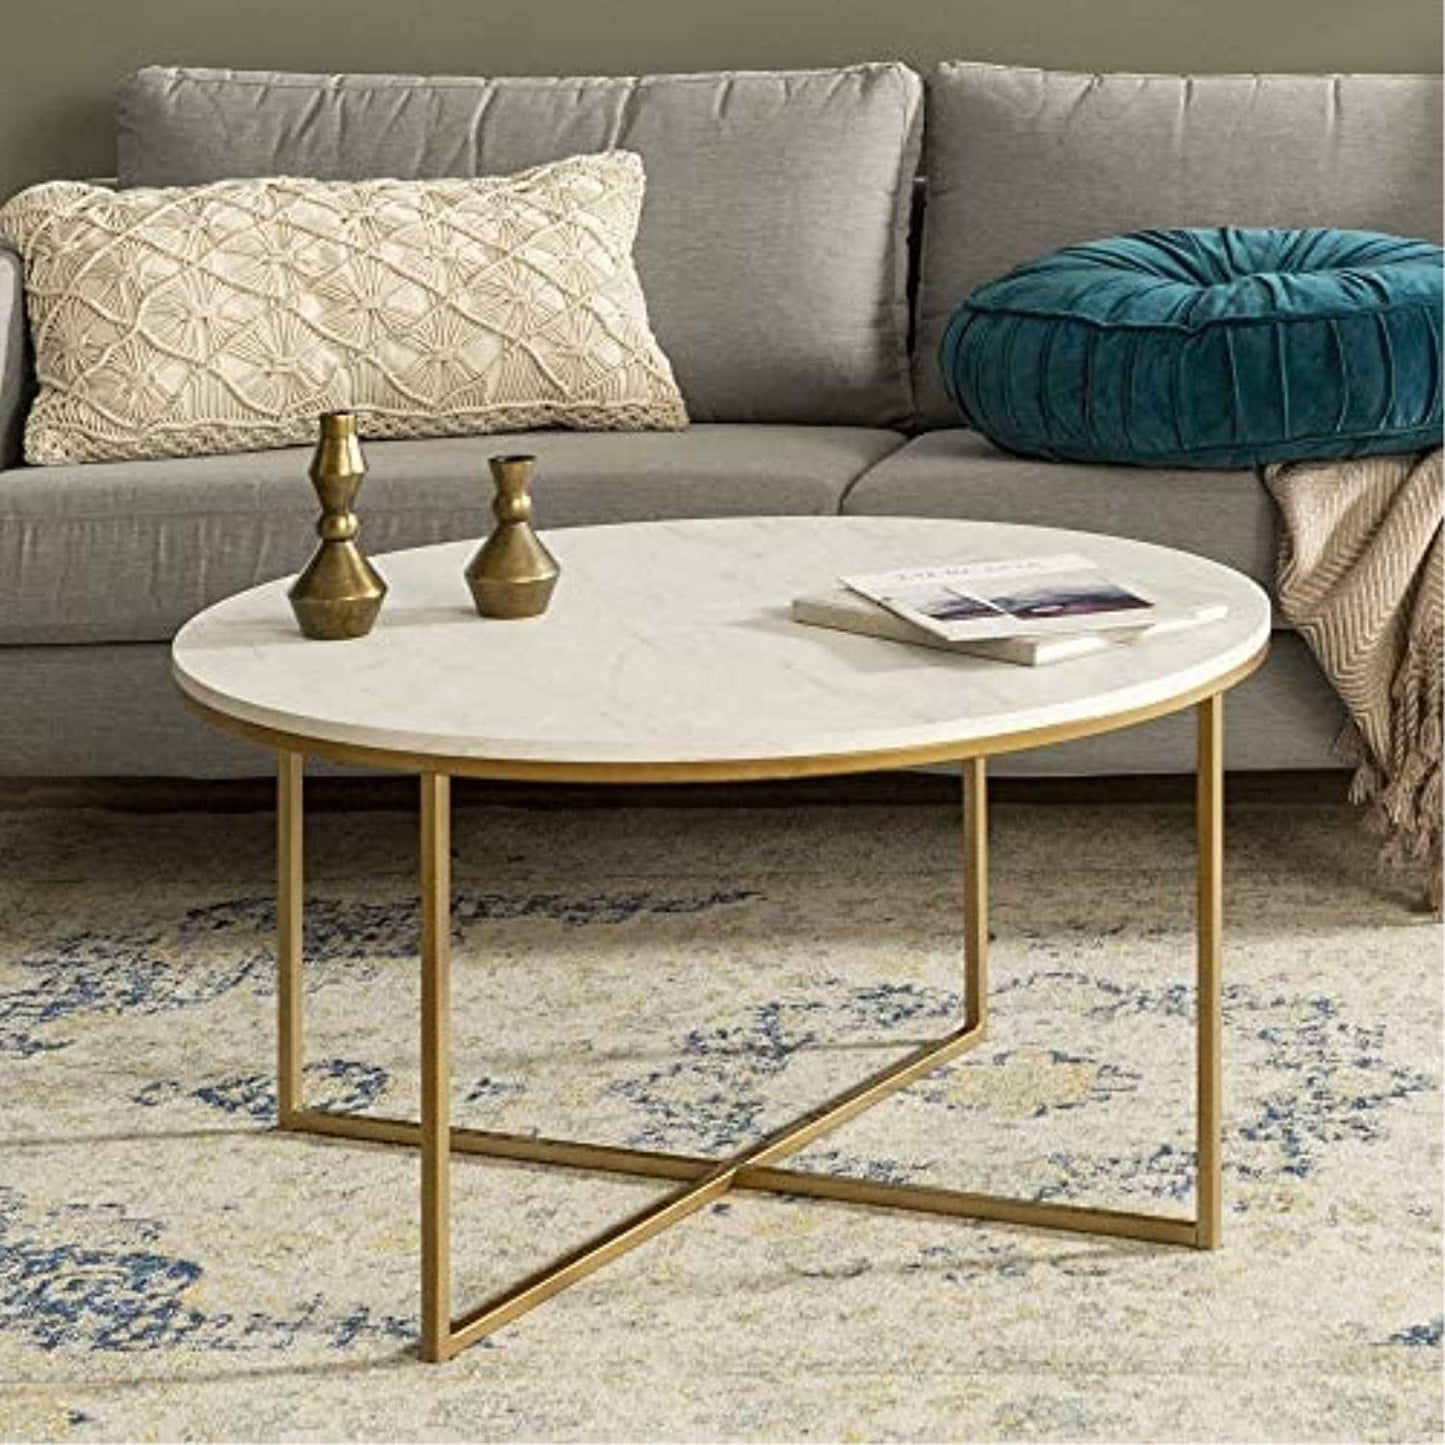 Abbiss Coffee Table Round center Table for Living Room